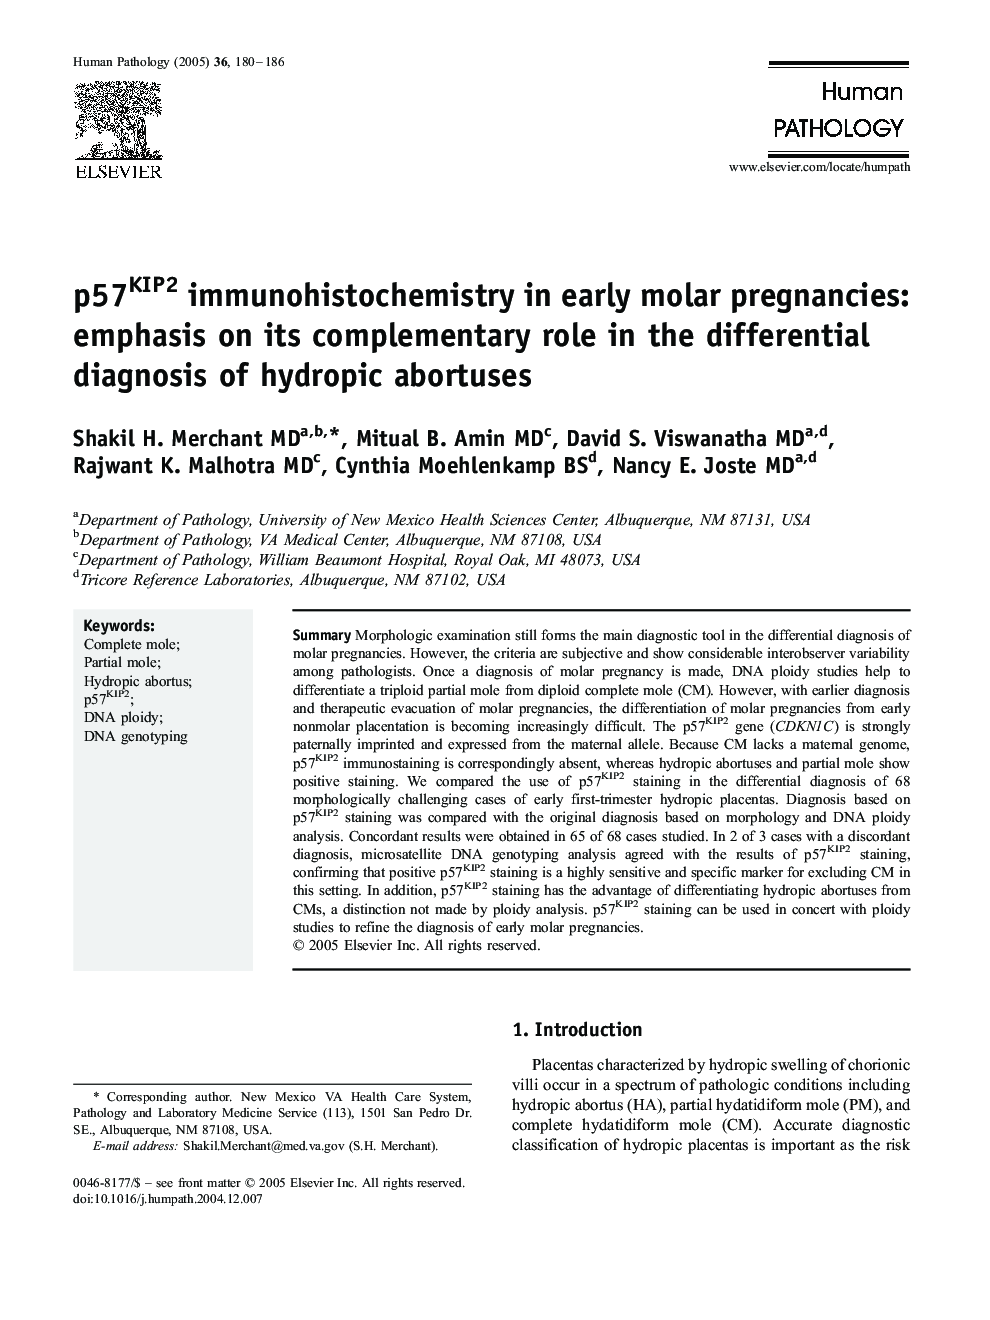 p57KIP2 immunohistochemistry in early molar pregnancies: emphasis on its complementary role in the differential diagnosis of hydropic abortuses